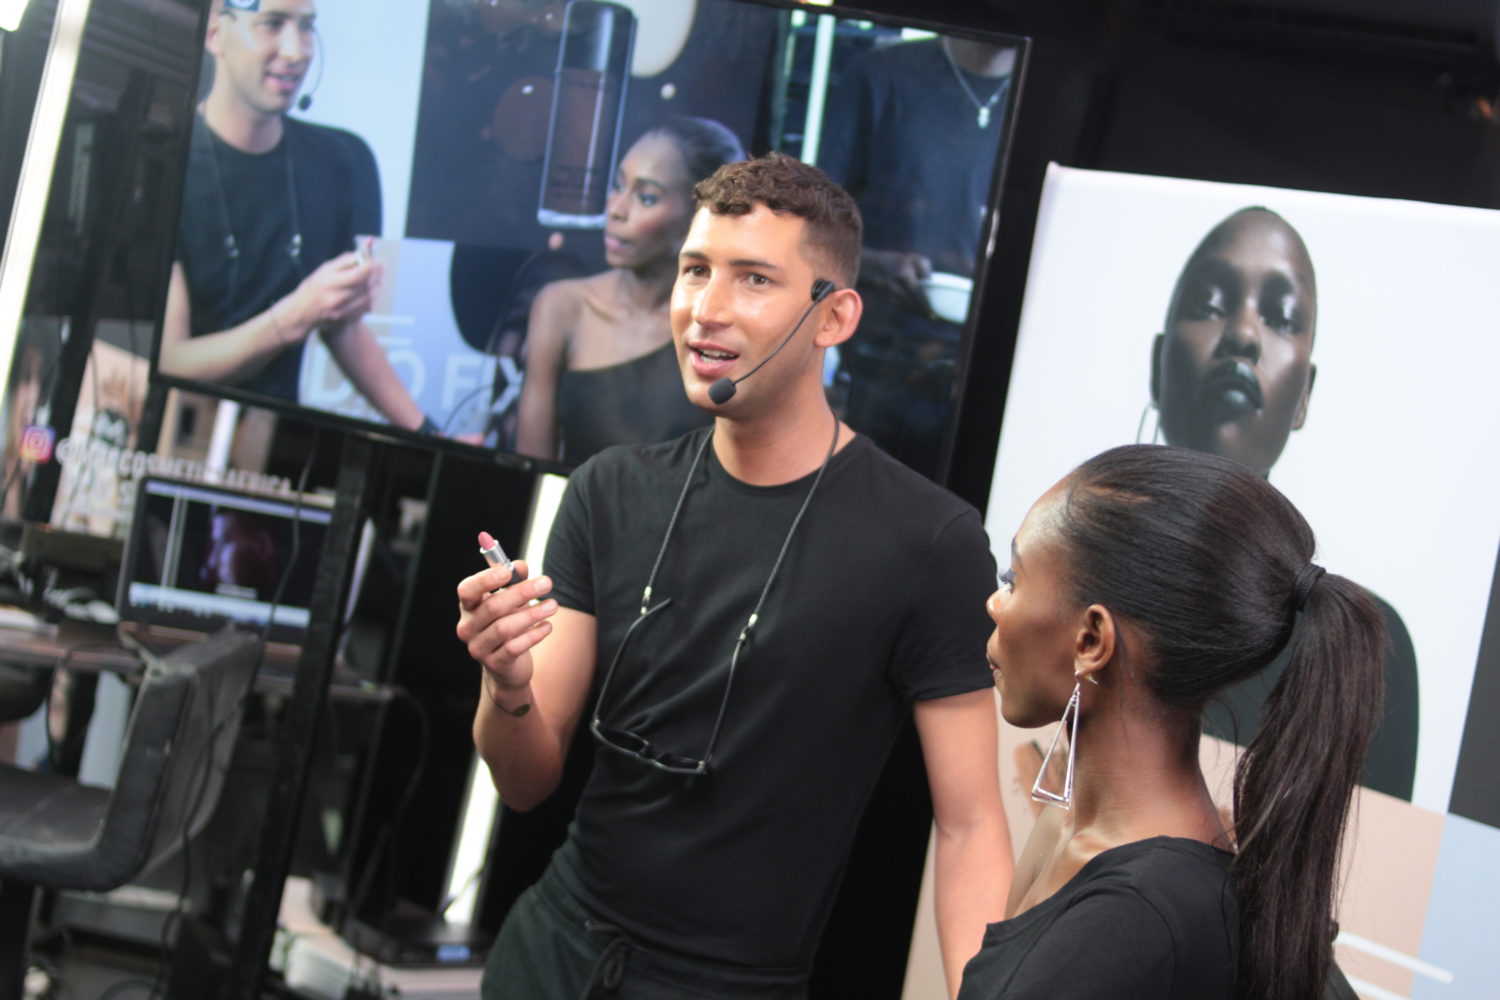 Did You Miss Out On All The Fun and Fab Moments At The M.A.C Cosmetics Event? Catch Up Now!